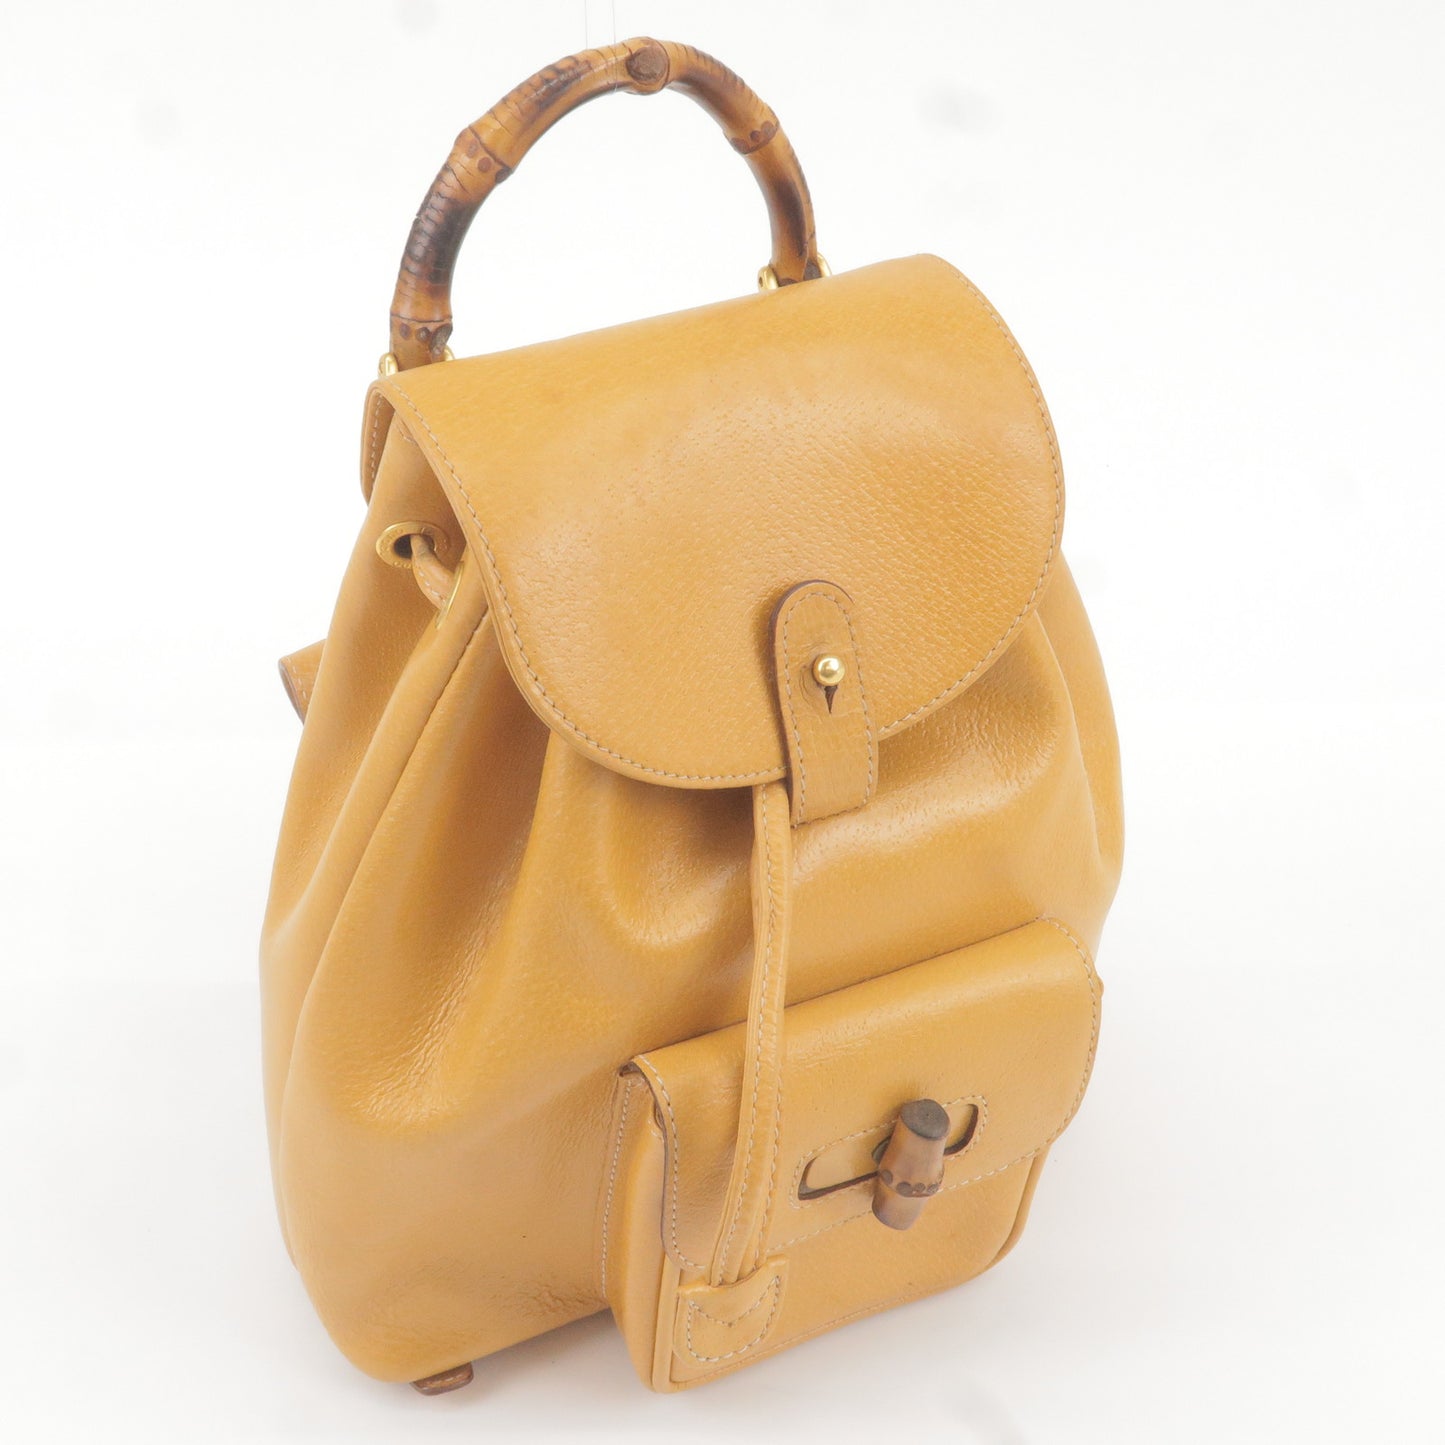 GUCCI Bamboo Leather Ruck Sack Yellow Beige 03.2265.0030